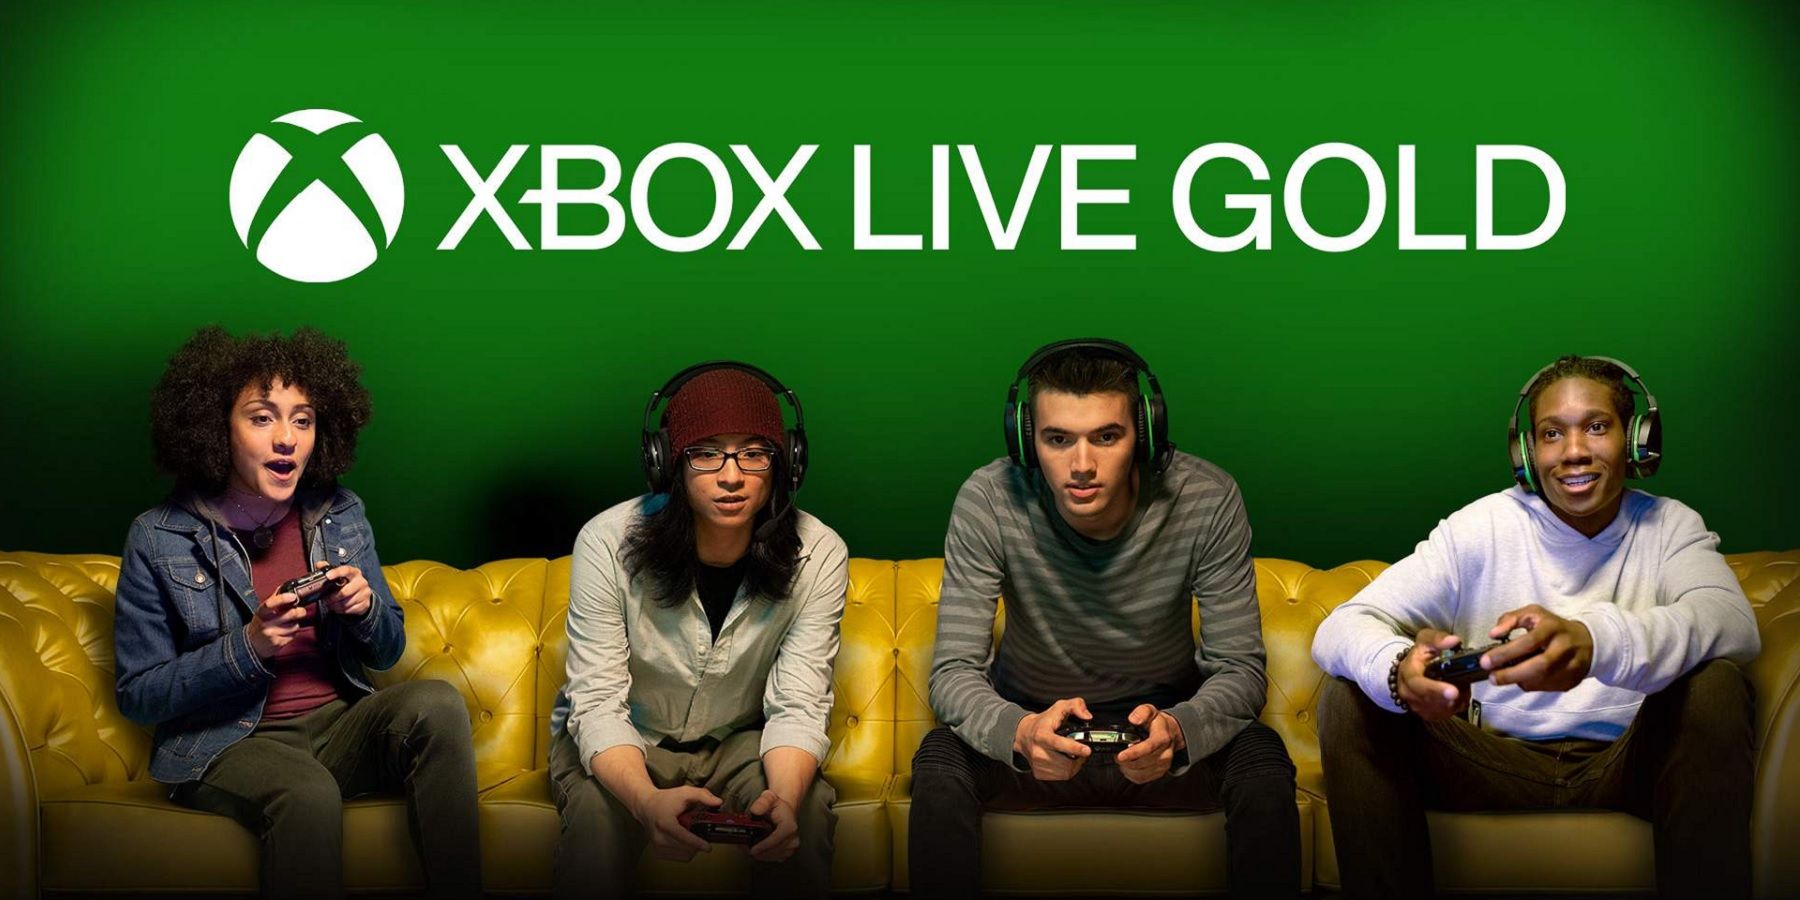 xbox live gold logo and players